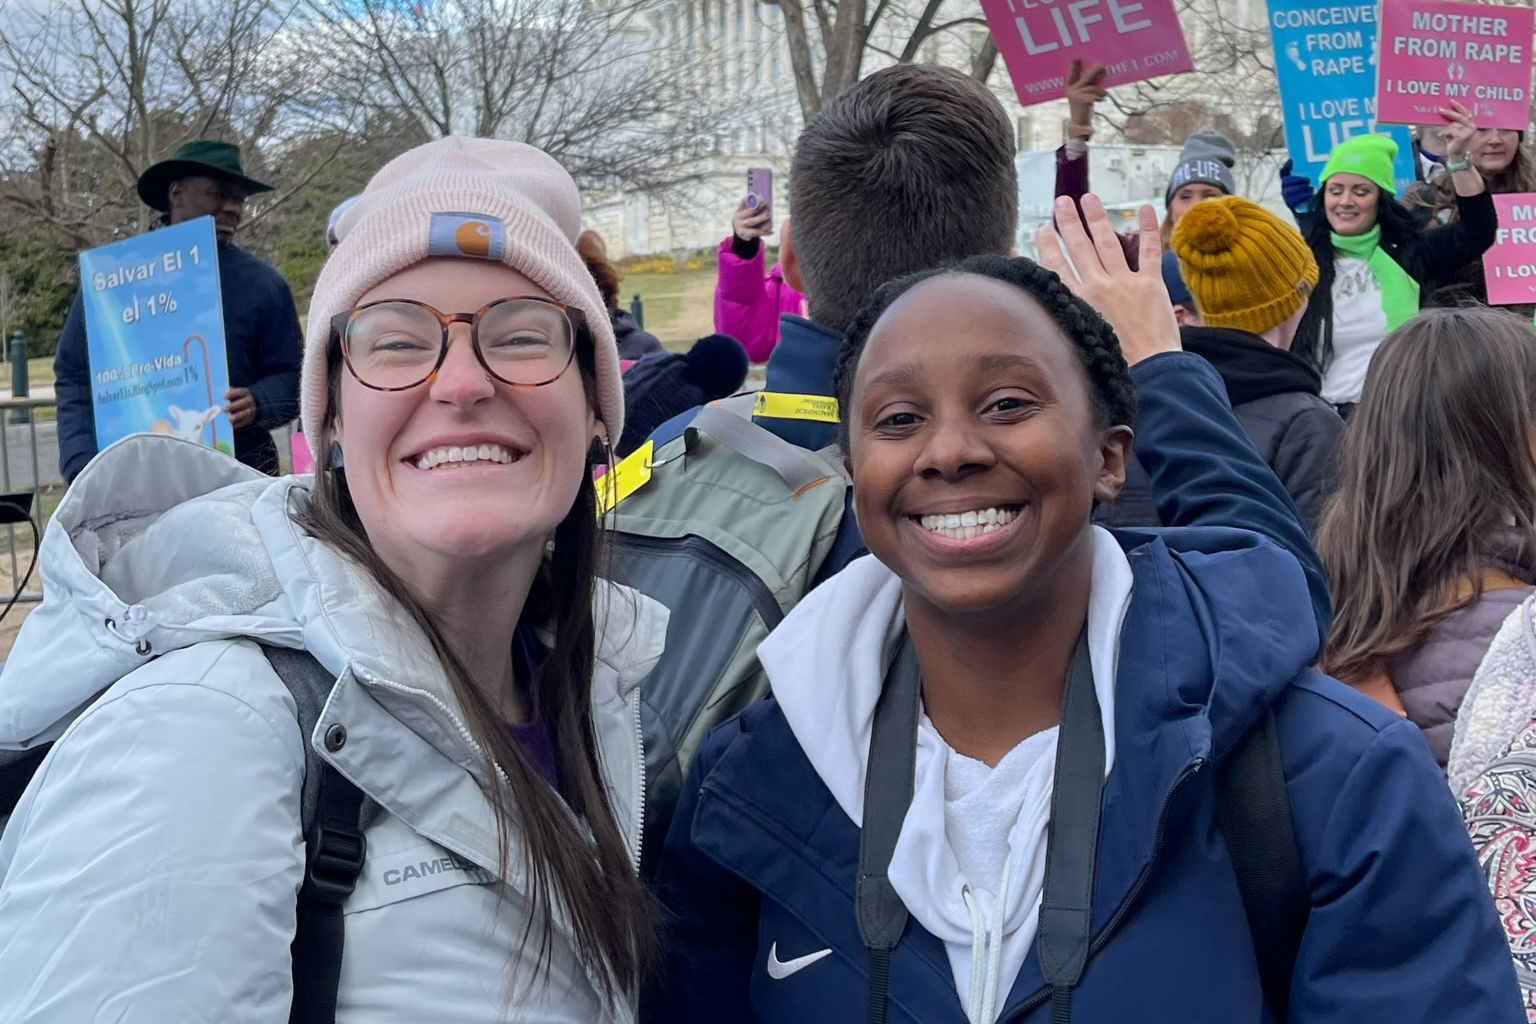 Sydney and Sammie at the March for Life